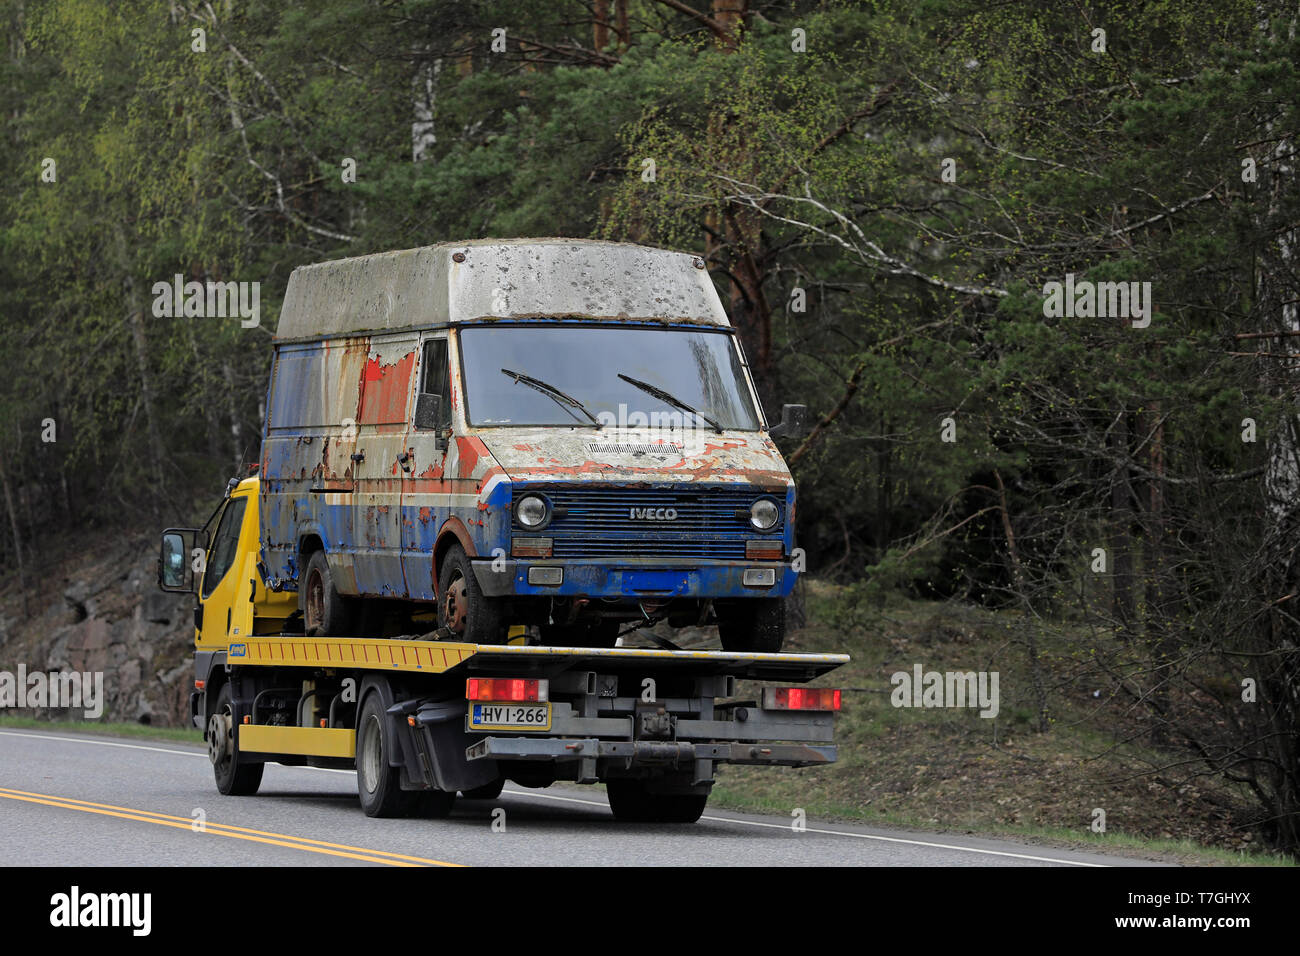 Salo, Finland - April 26, 2019: Yellow Mitsubishi Fuso Canter tow truck carries an old van along highway on a day of spring, rear view. Stock Photo